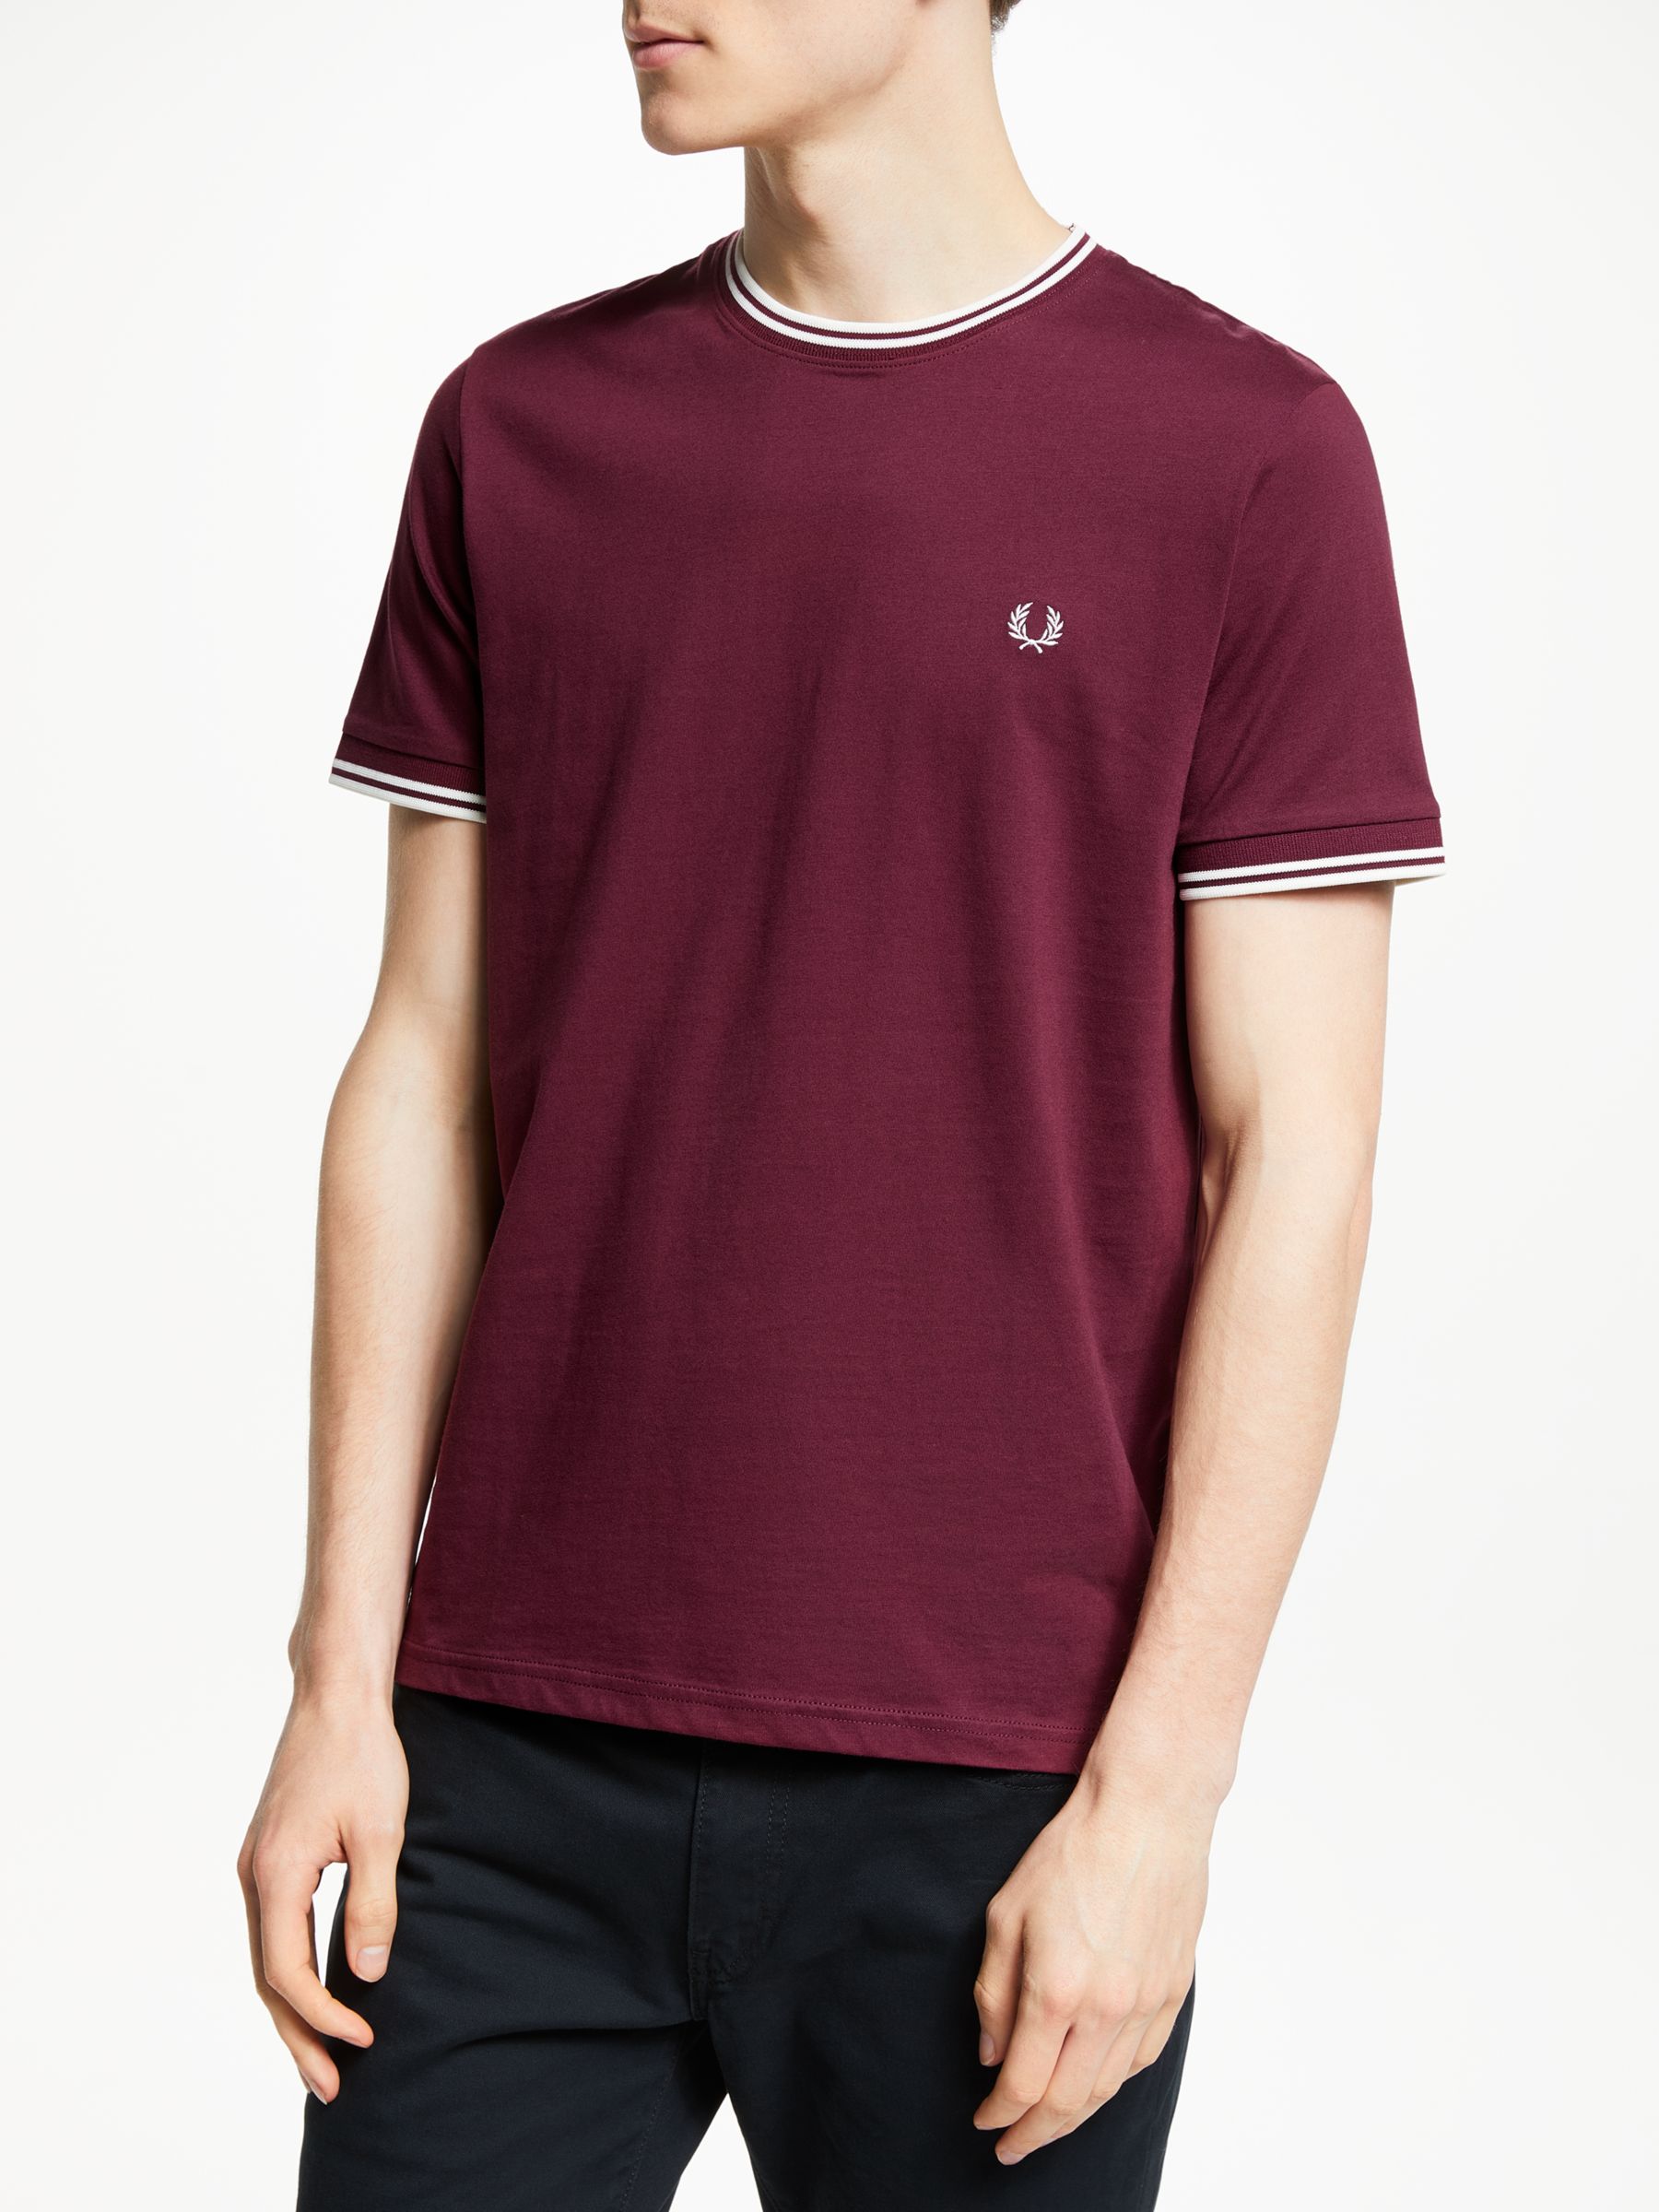 Fred Perry Twin Tipped T-Shirt, Aubergine, M